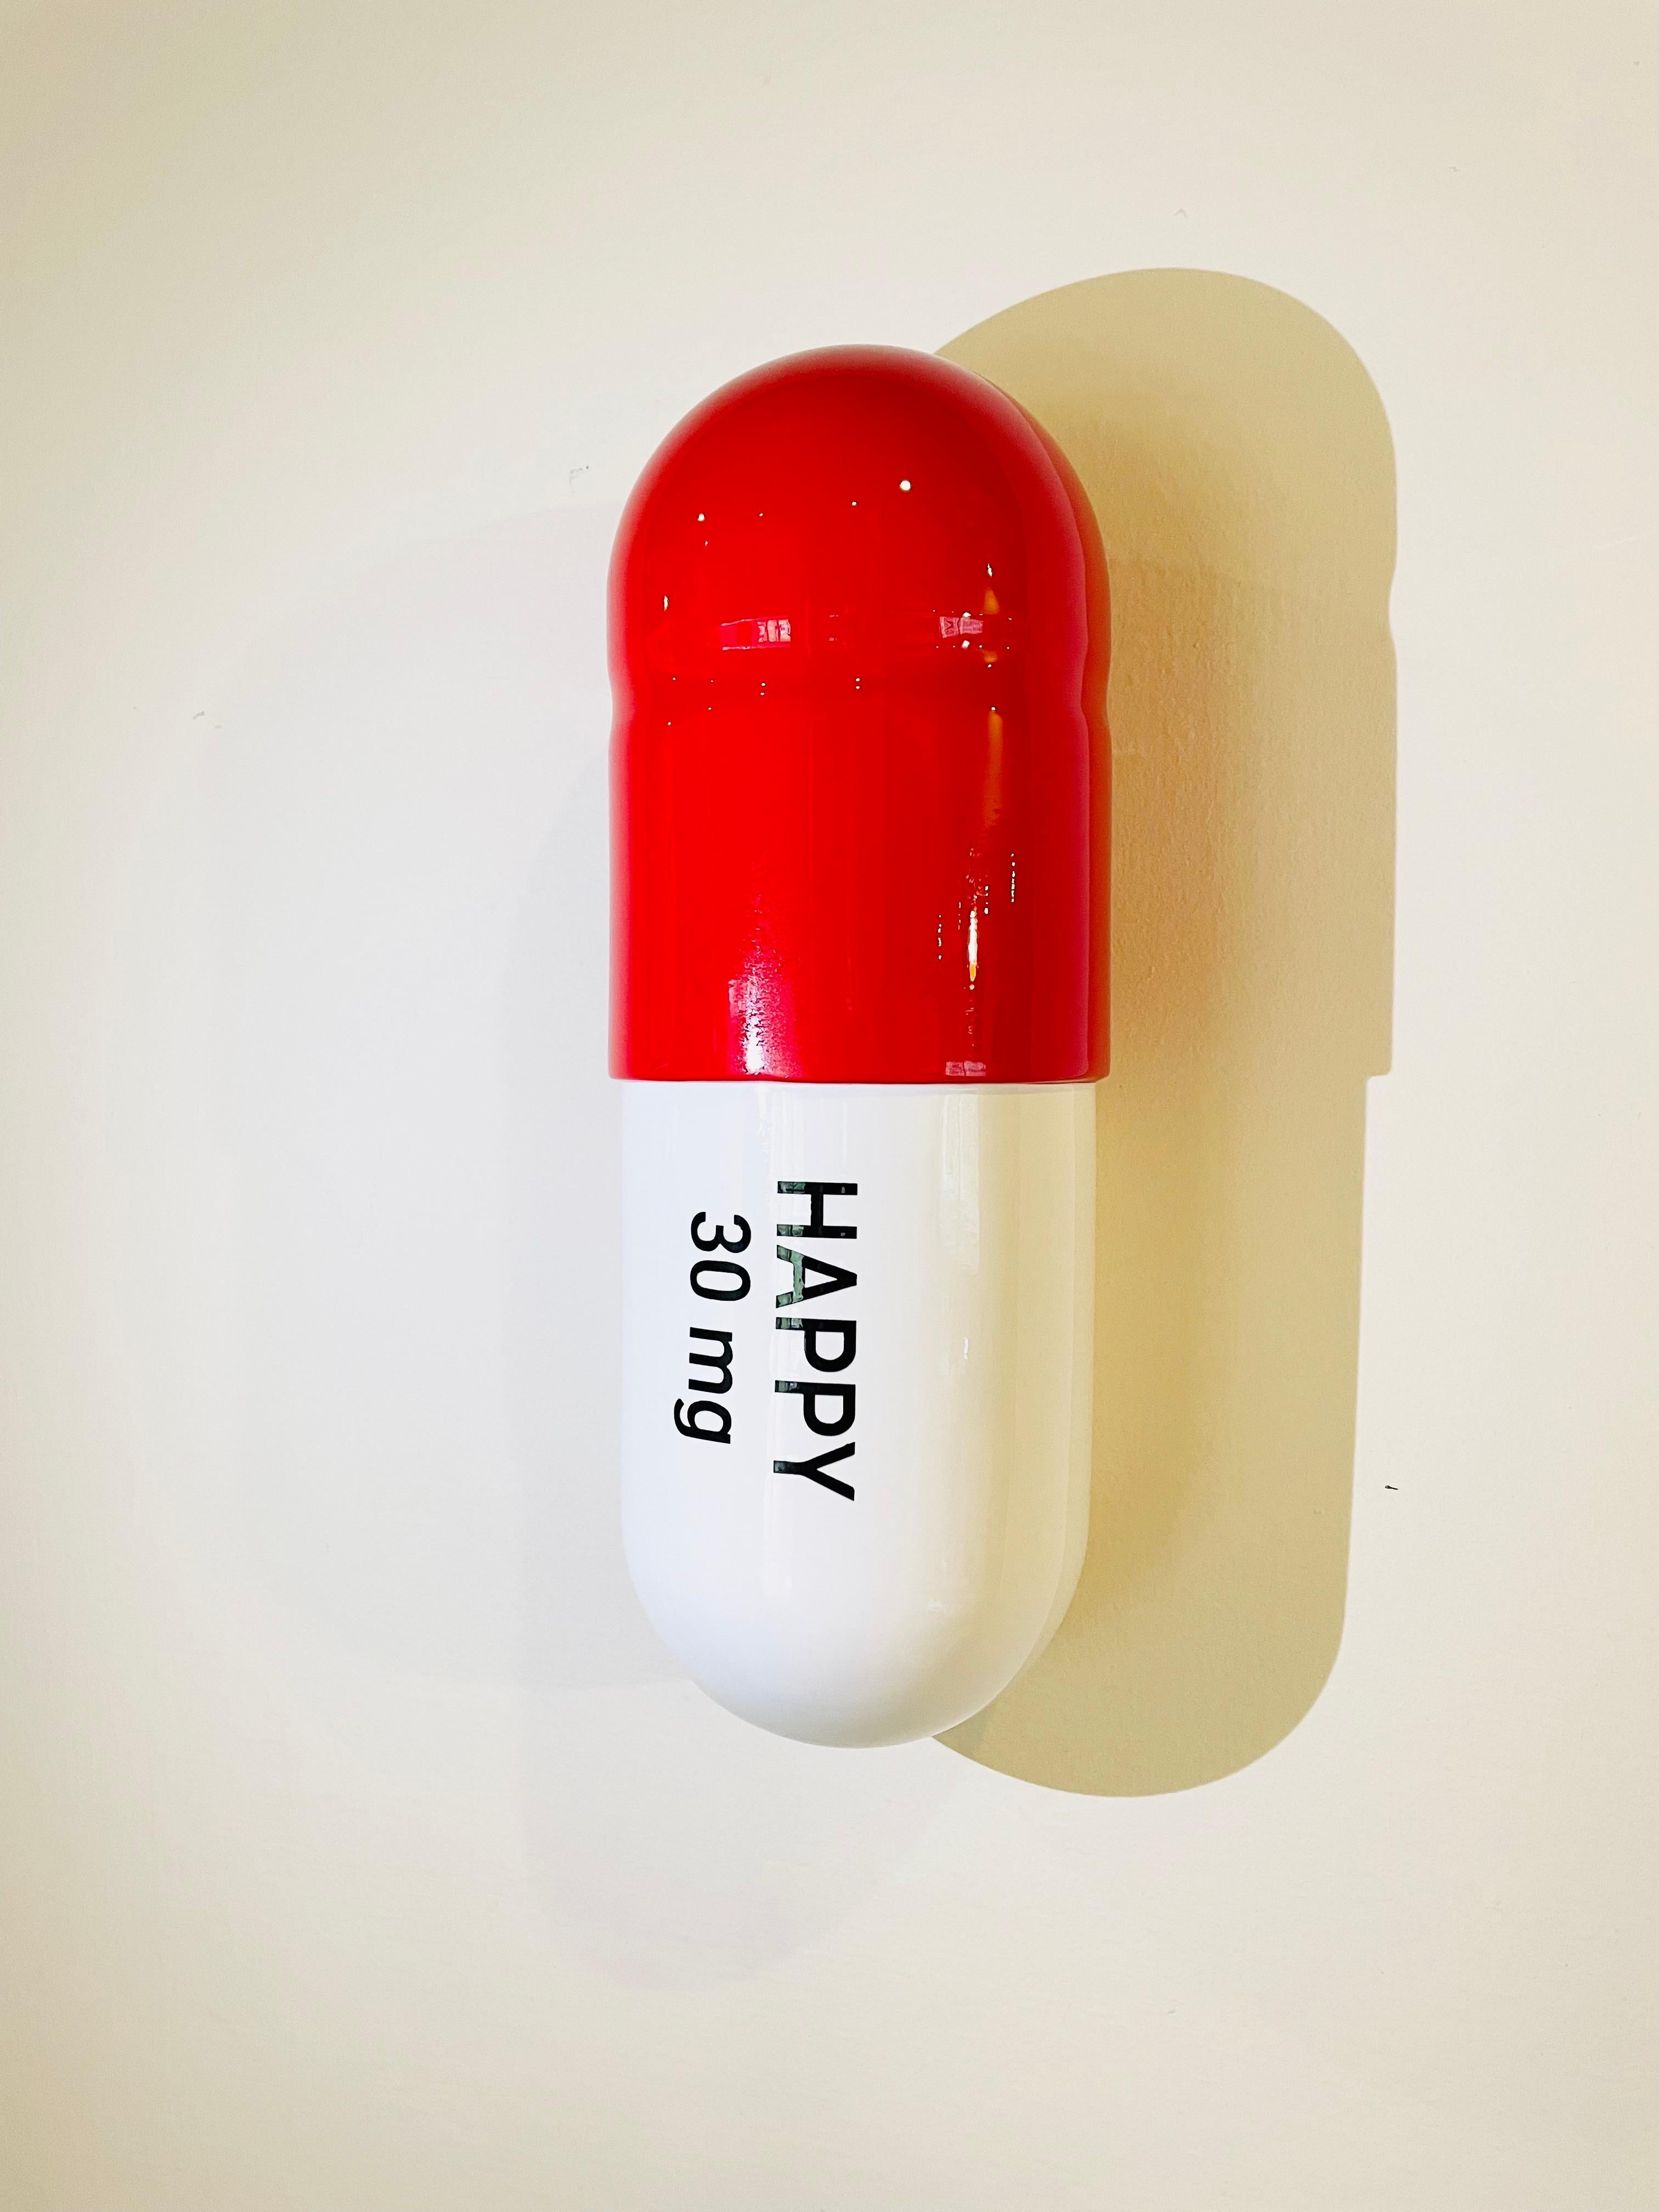 30 mg Large Happy pill (Red and White) - figurative sculpture - Sculpture by Tal Nehoray